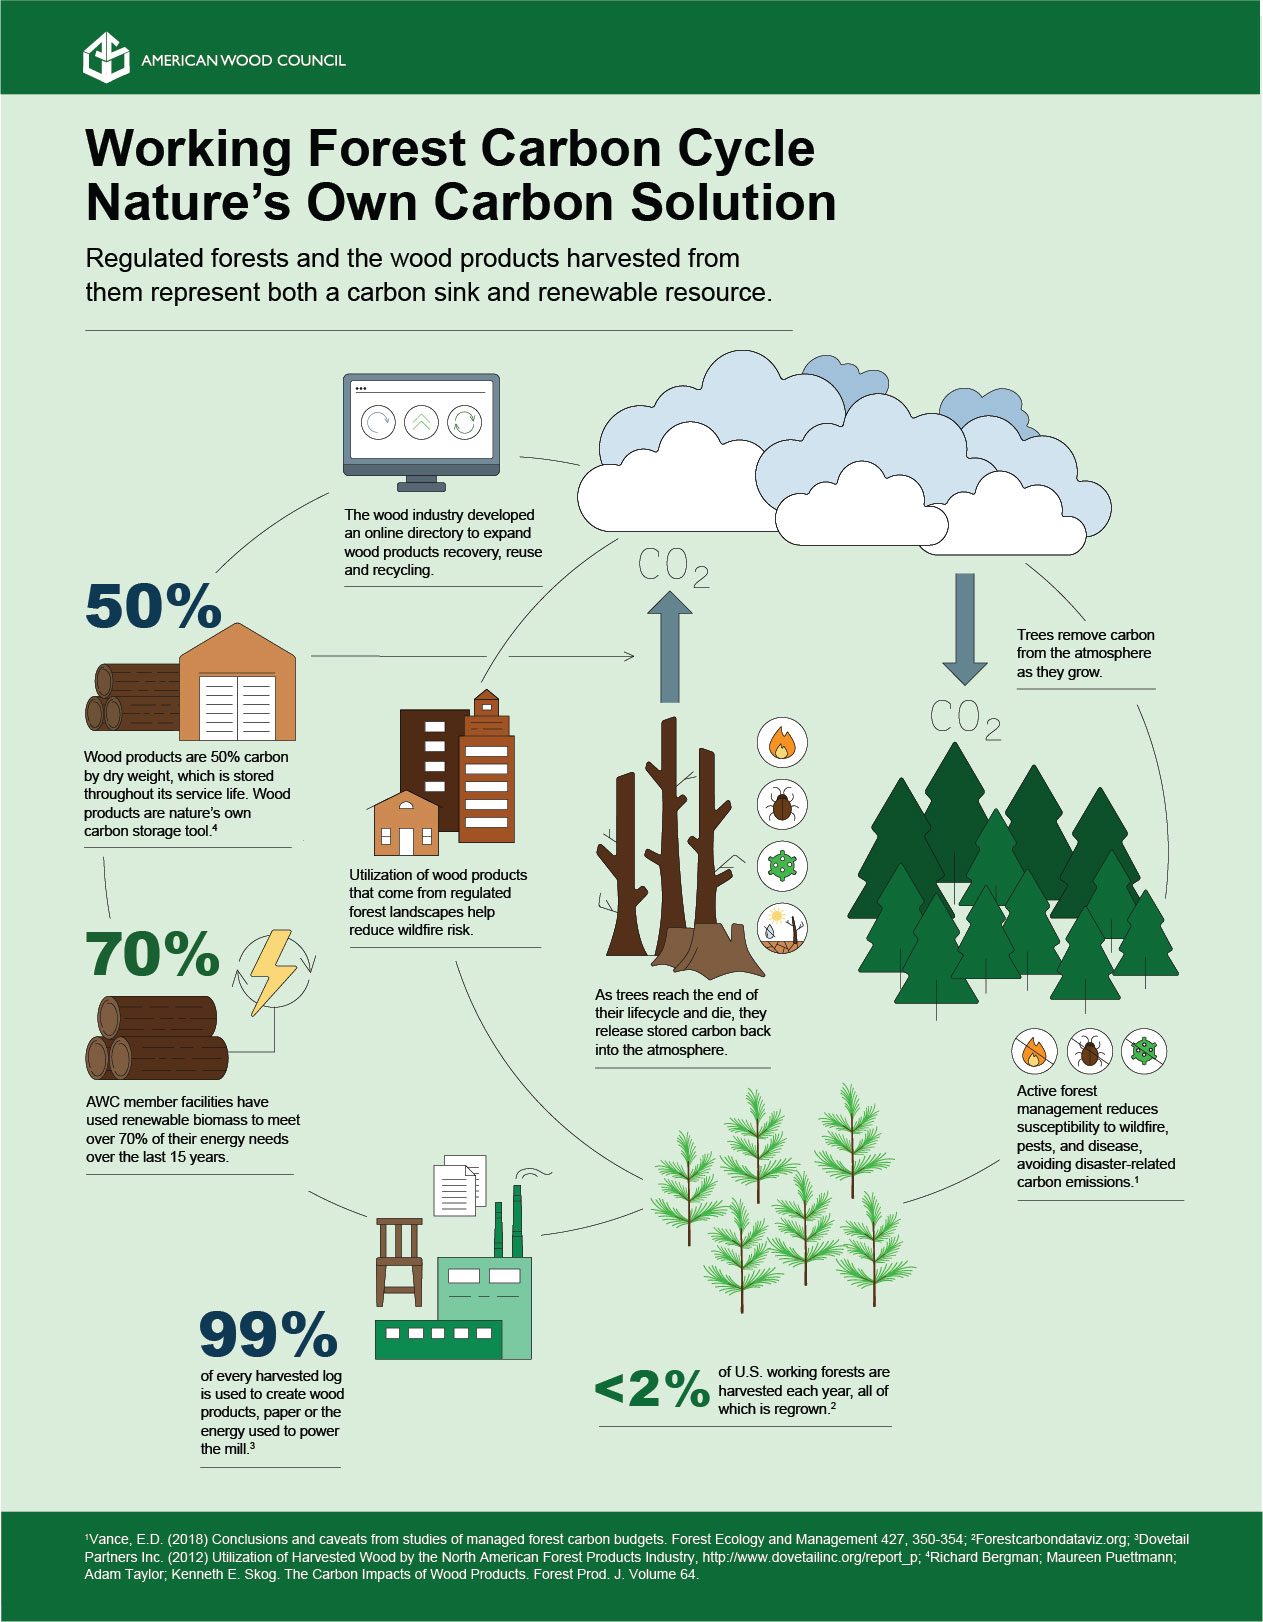 An illustrated graphic that shows how managed forests absorb carbon from the atmosphere and store it in growing trees, how harvbest produces wood products that also store carbon in buildings and other things, and how sustainable forestry practices such as replanting keep managed forests healthy and perpetuate a cycle that is very good at absorbing and storing carbon from the atmosphere.